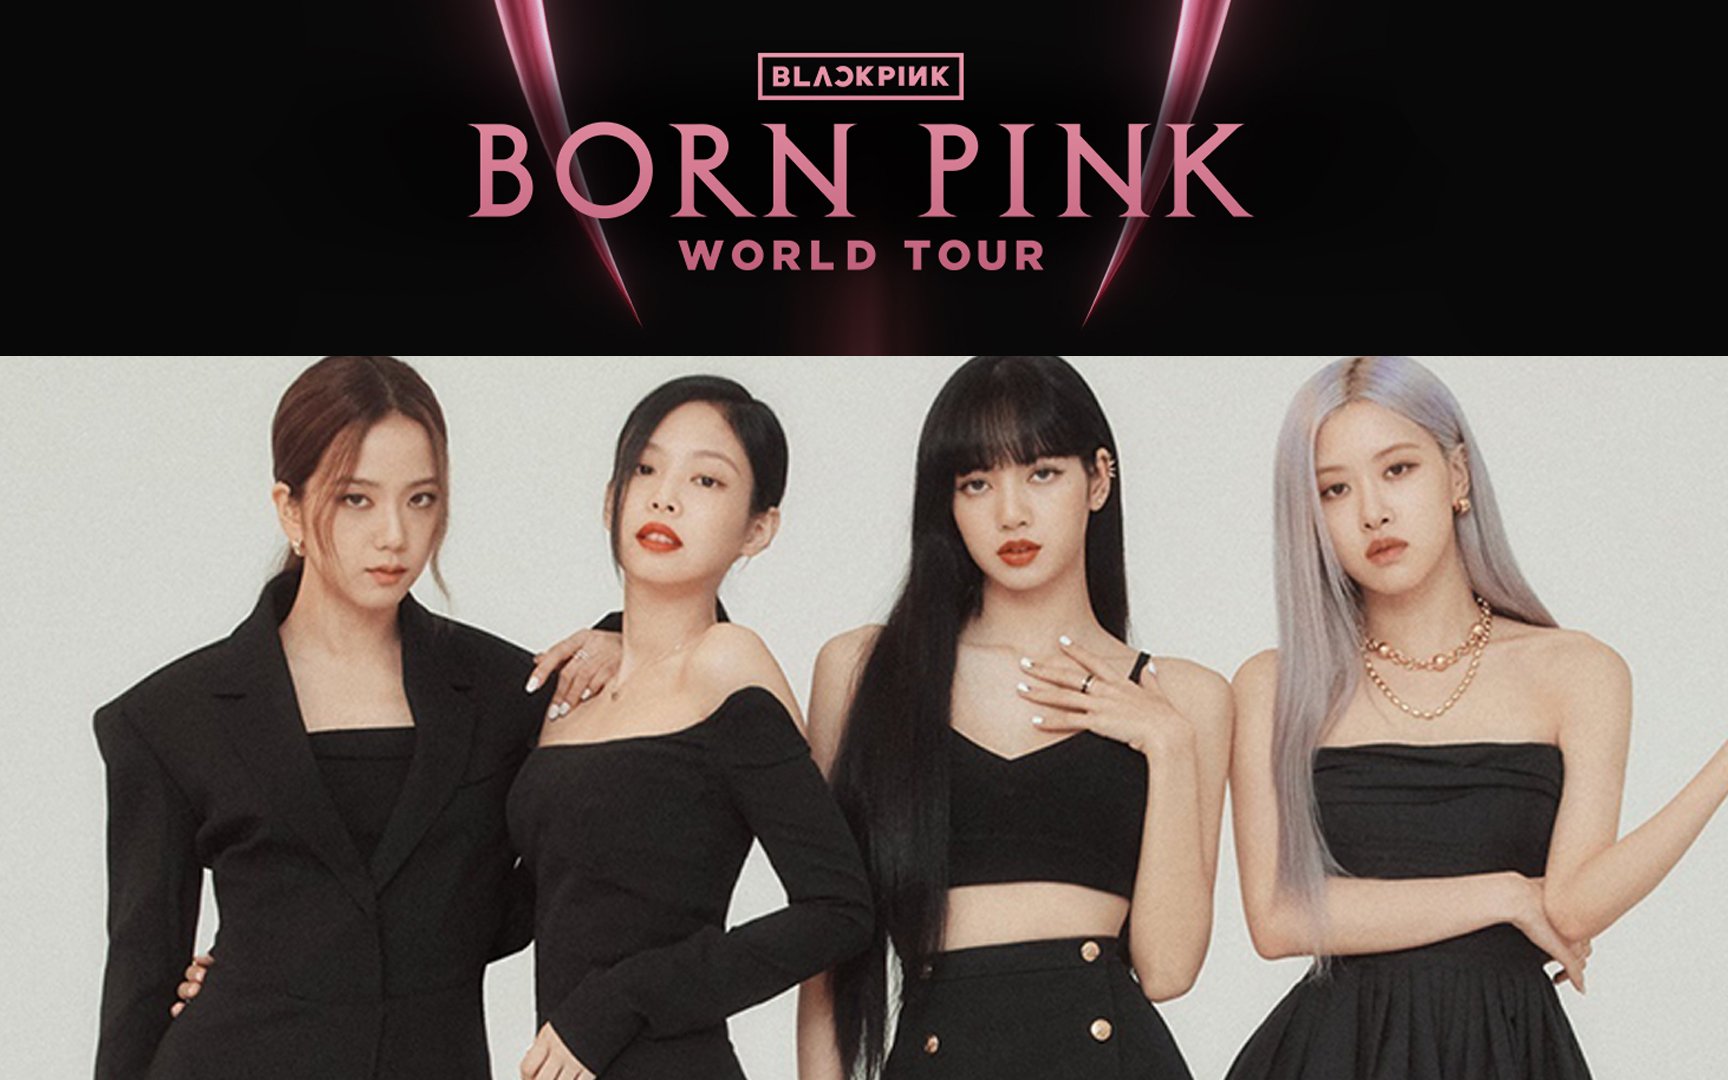 Is BLACKPINK coming to your area? Check out the dates and locations of  BLACKPINK's upcoming 'BORN PINK' world tour